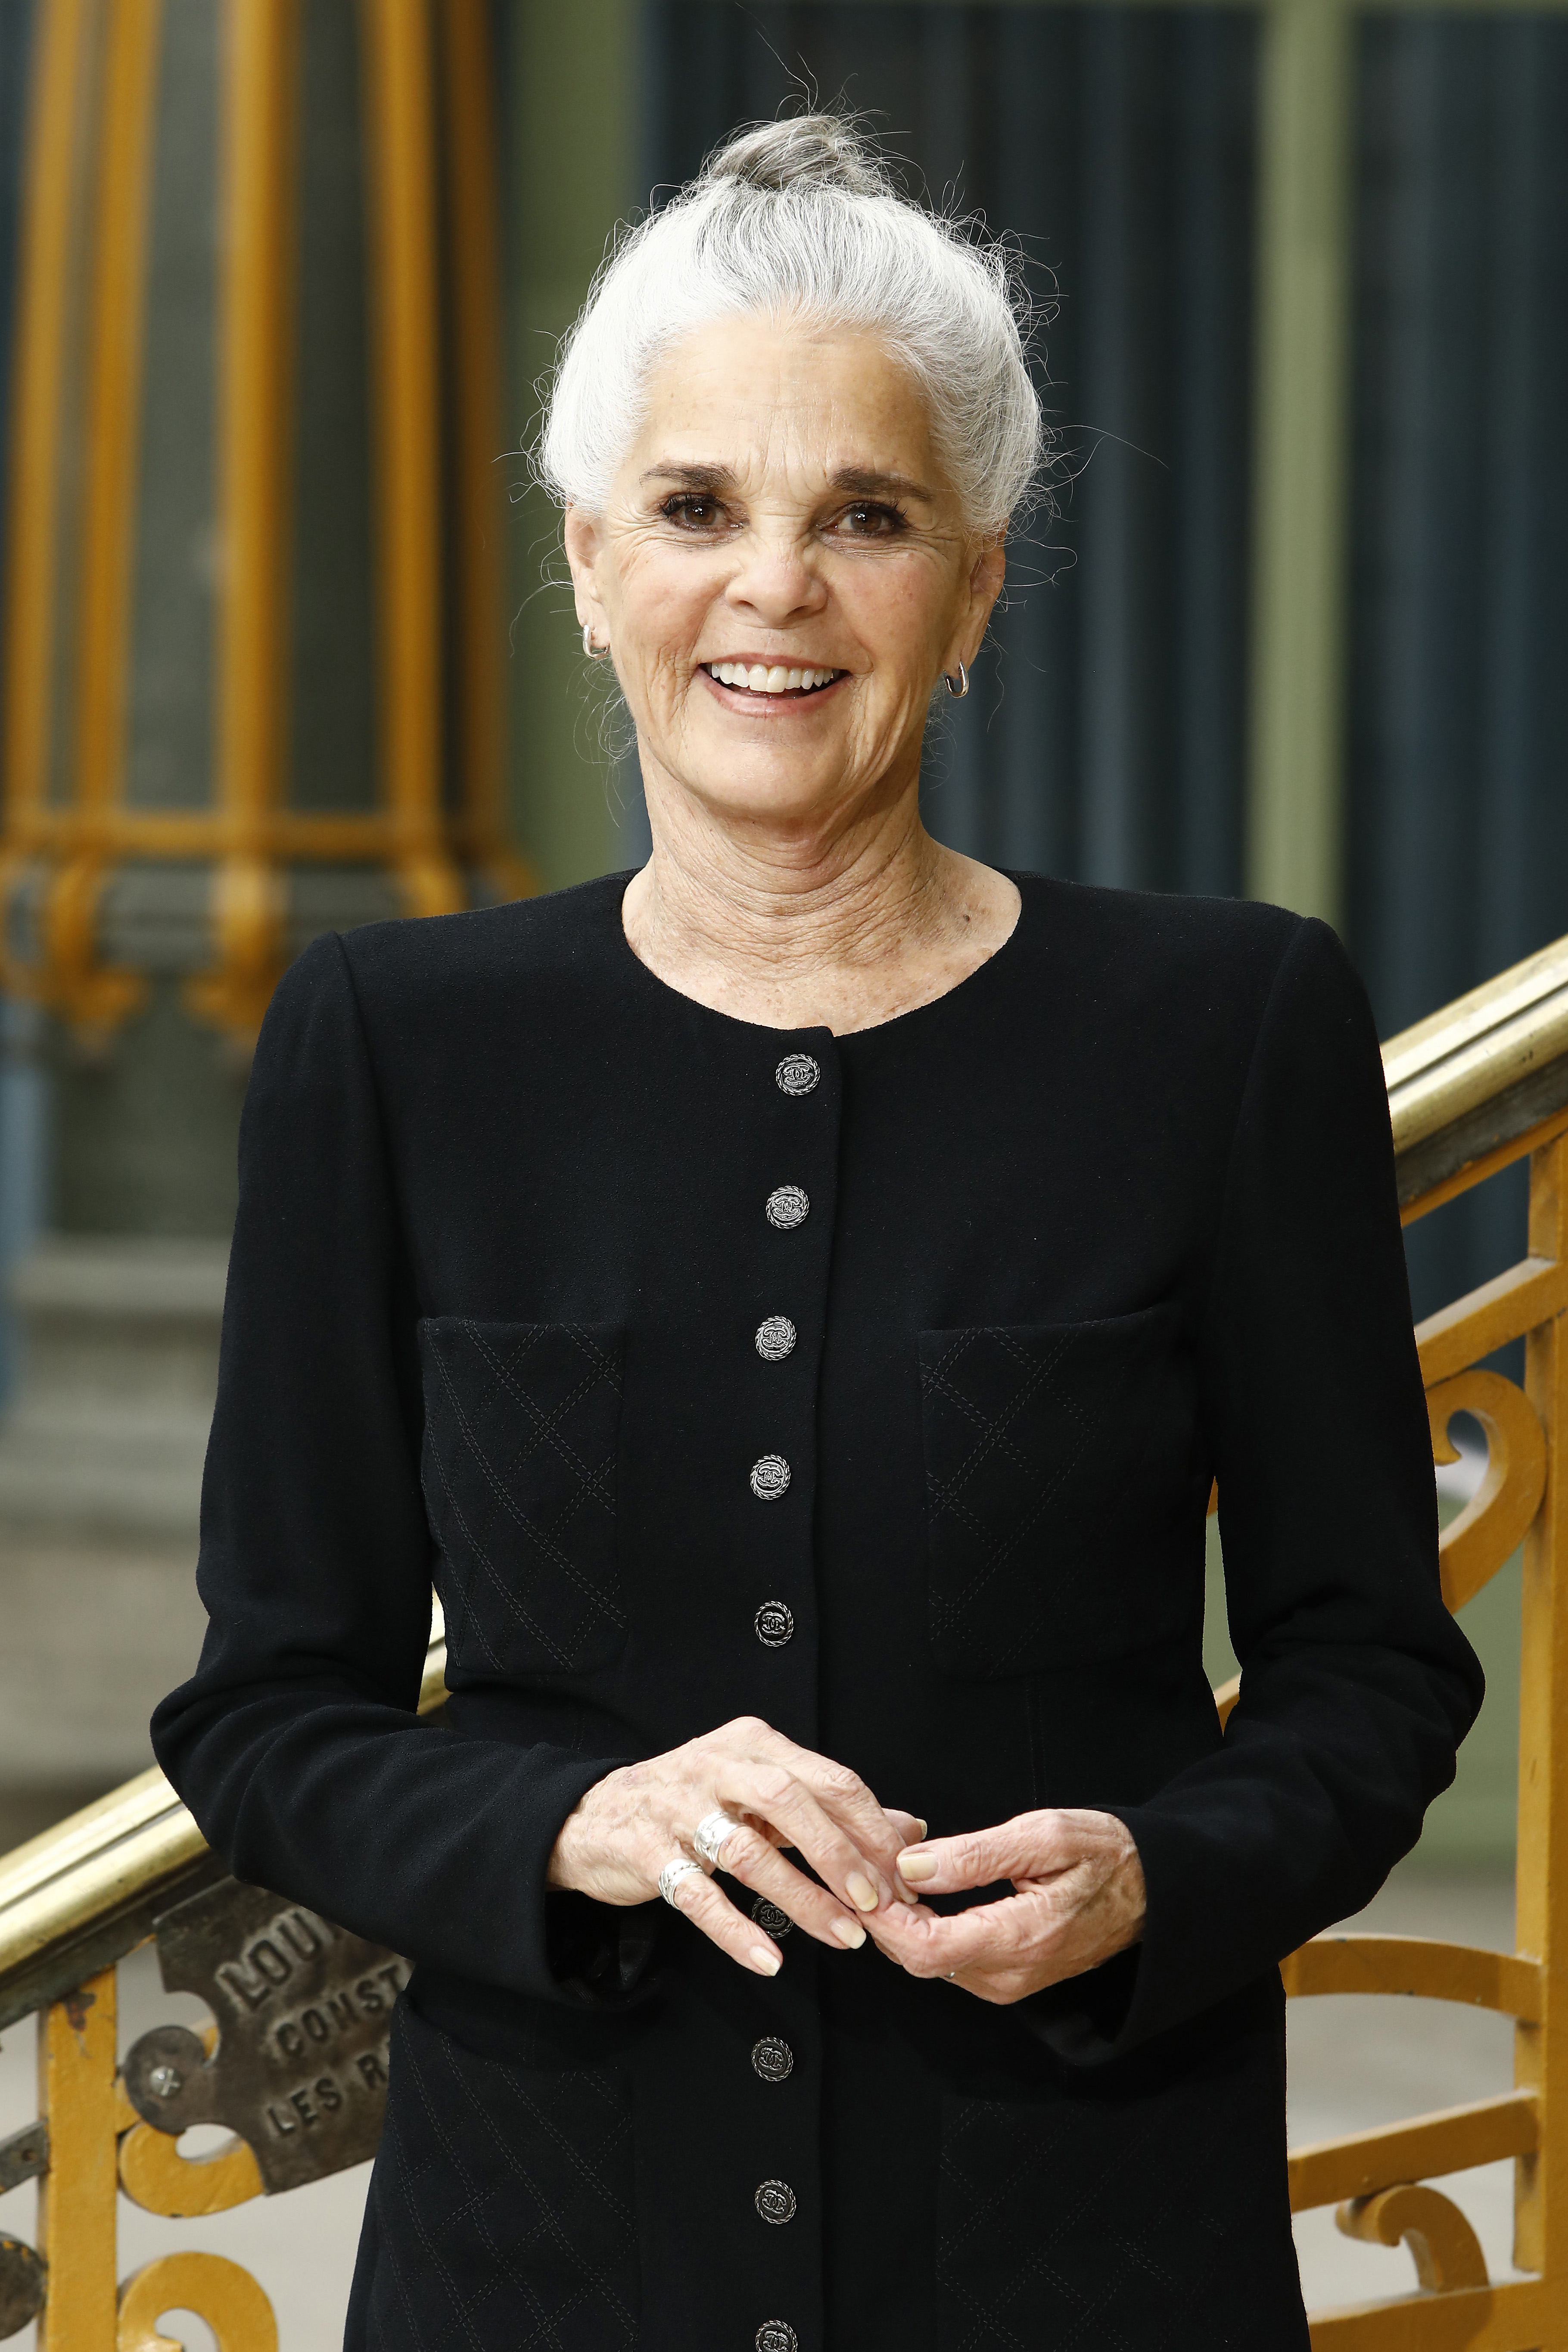 Ali MacGraw at the PhotoCall for the Chanel Cruise 2020 Collection in Paris, 2019 | Source: Getty Images